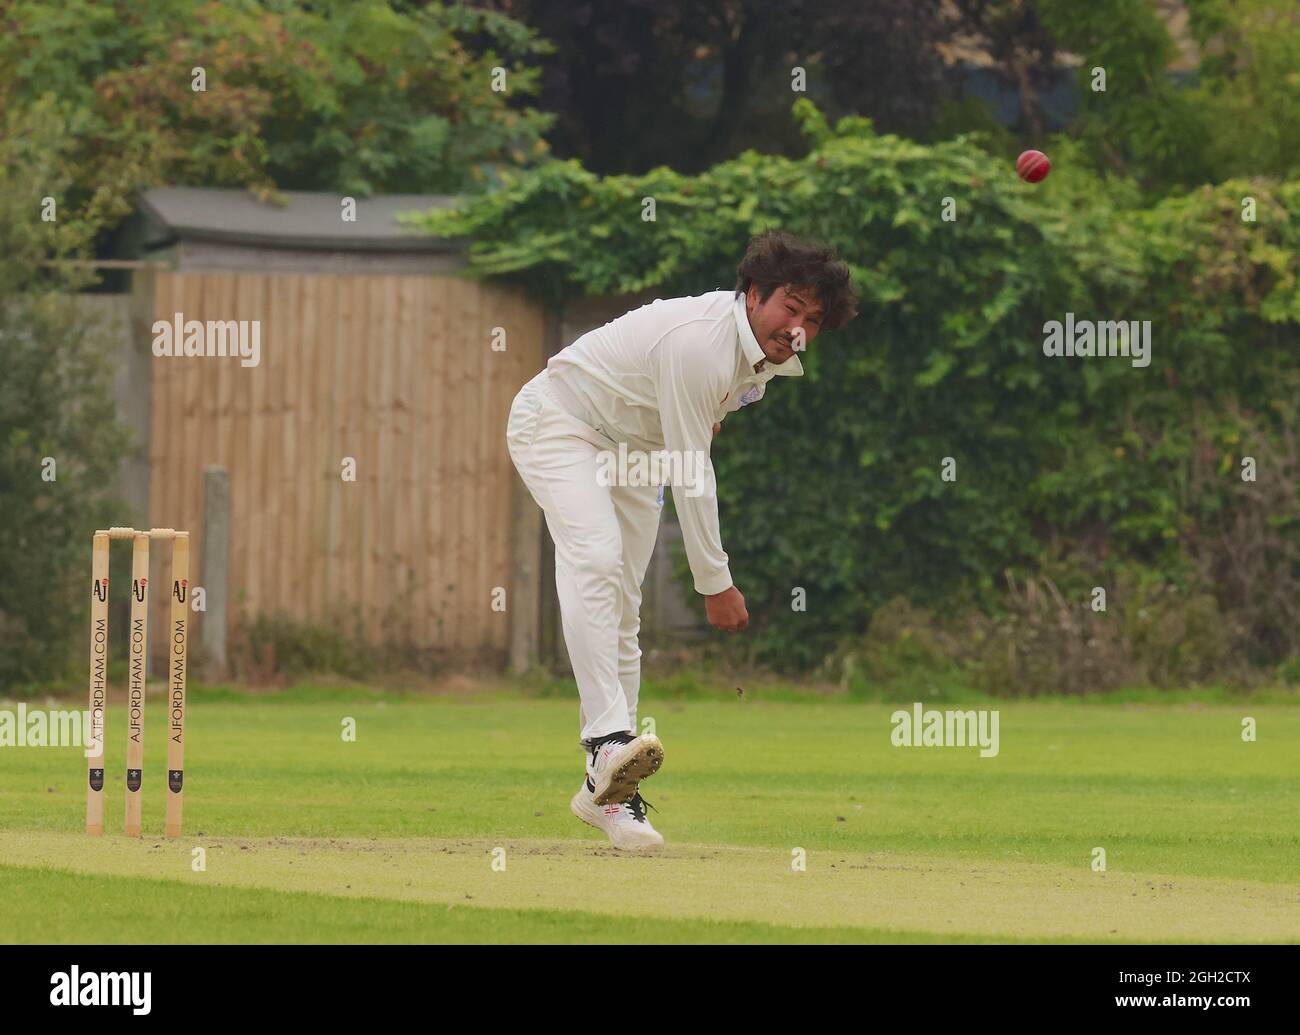 London, UK. 4 September, 2021. South London, UK.  G H Crawford-Khan bowling for Dulwich Cricket Club as they take on Dorking CC in the Surrey Championship Division 2 match at Dulwich, South London. David Rowe/ Alamy Live News Stock Photo